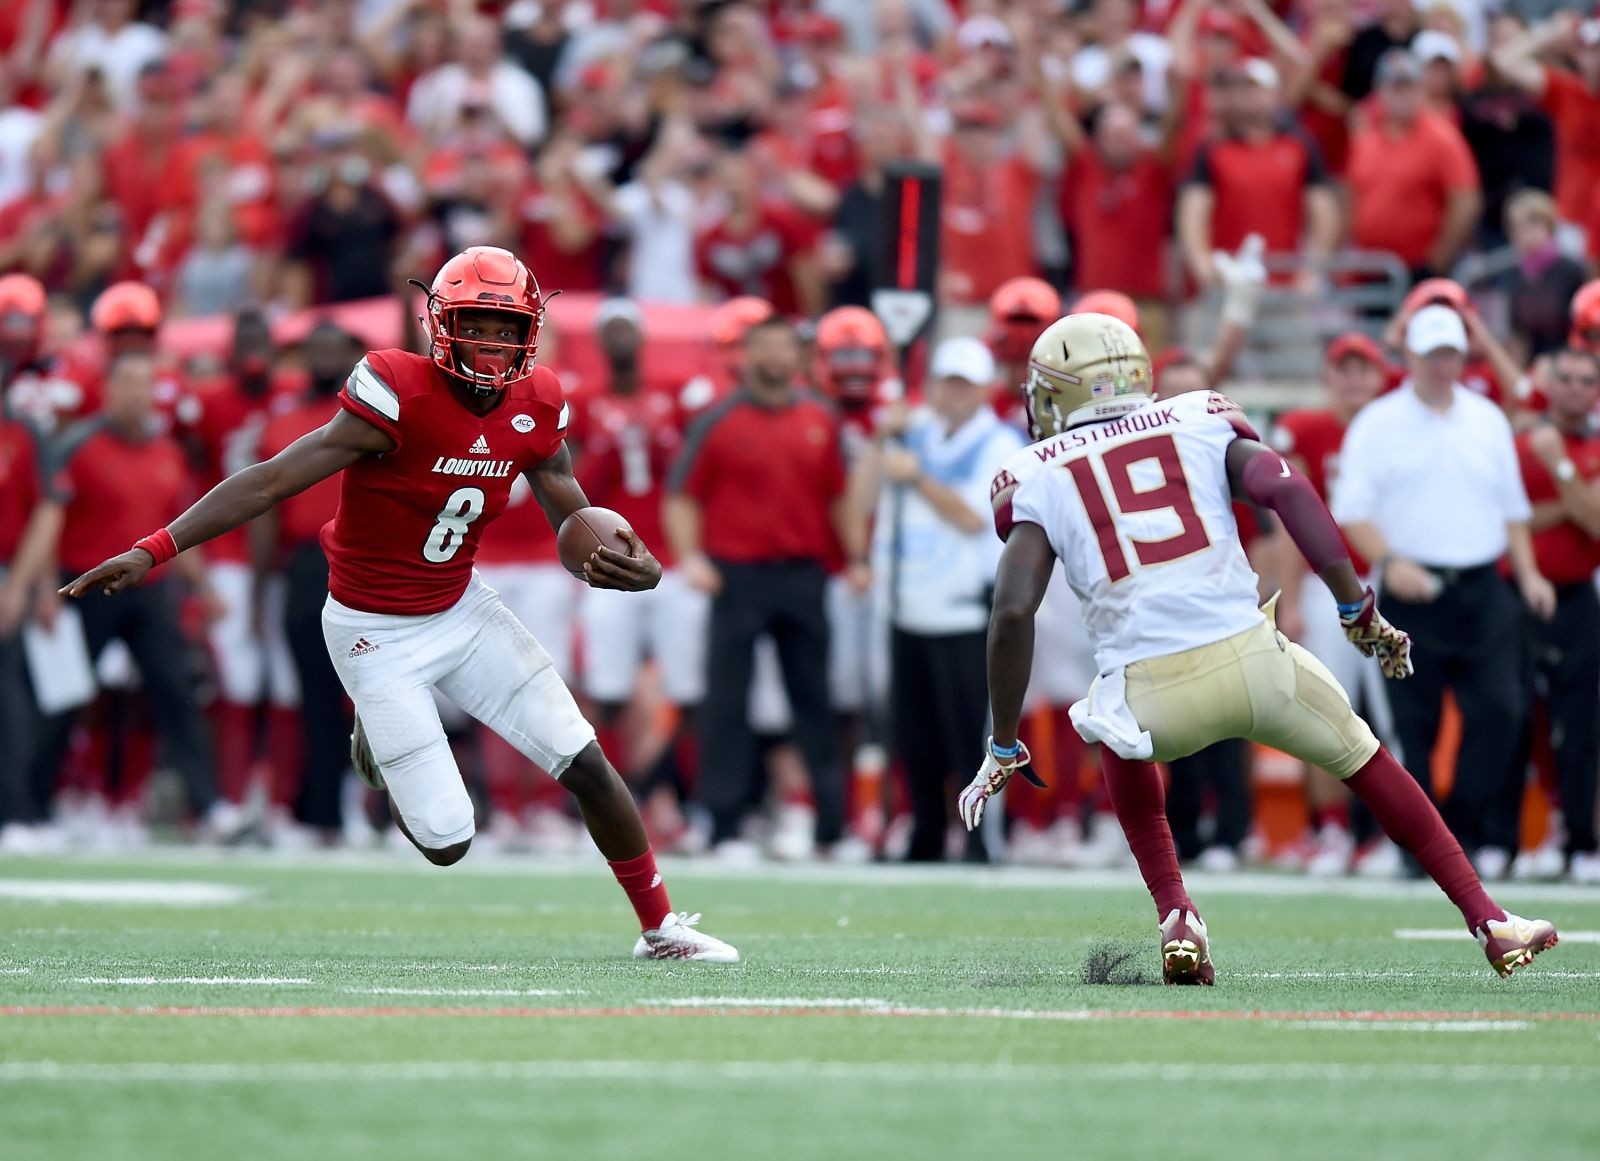 FSU Football: How blowout loss at Louisville actually helped Noles future